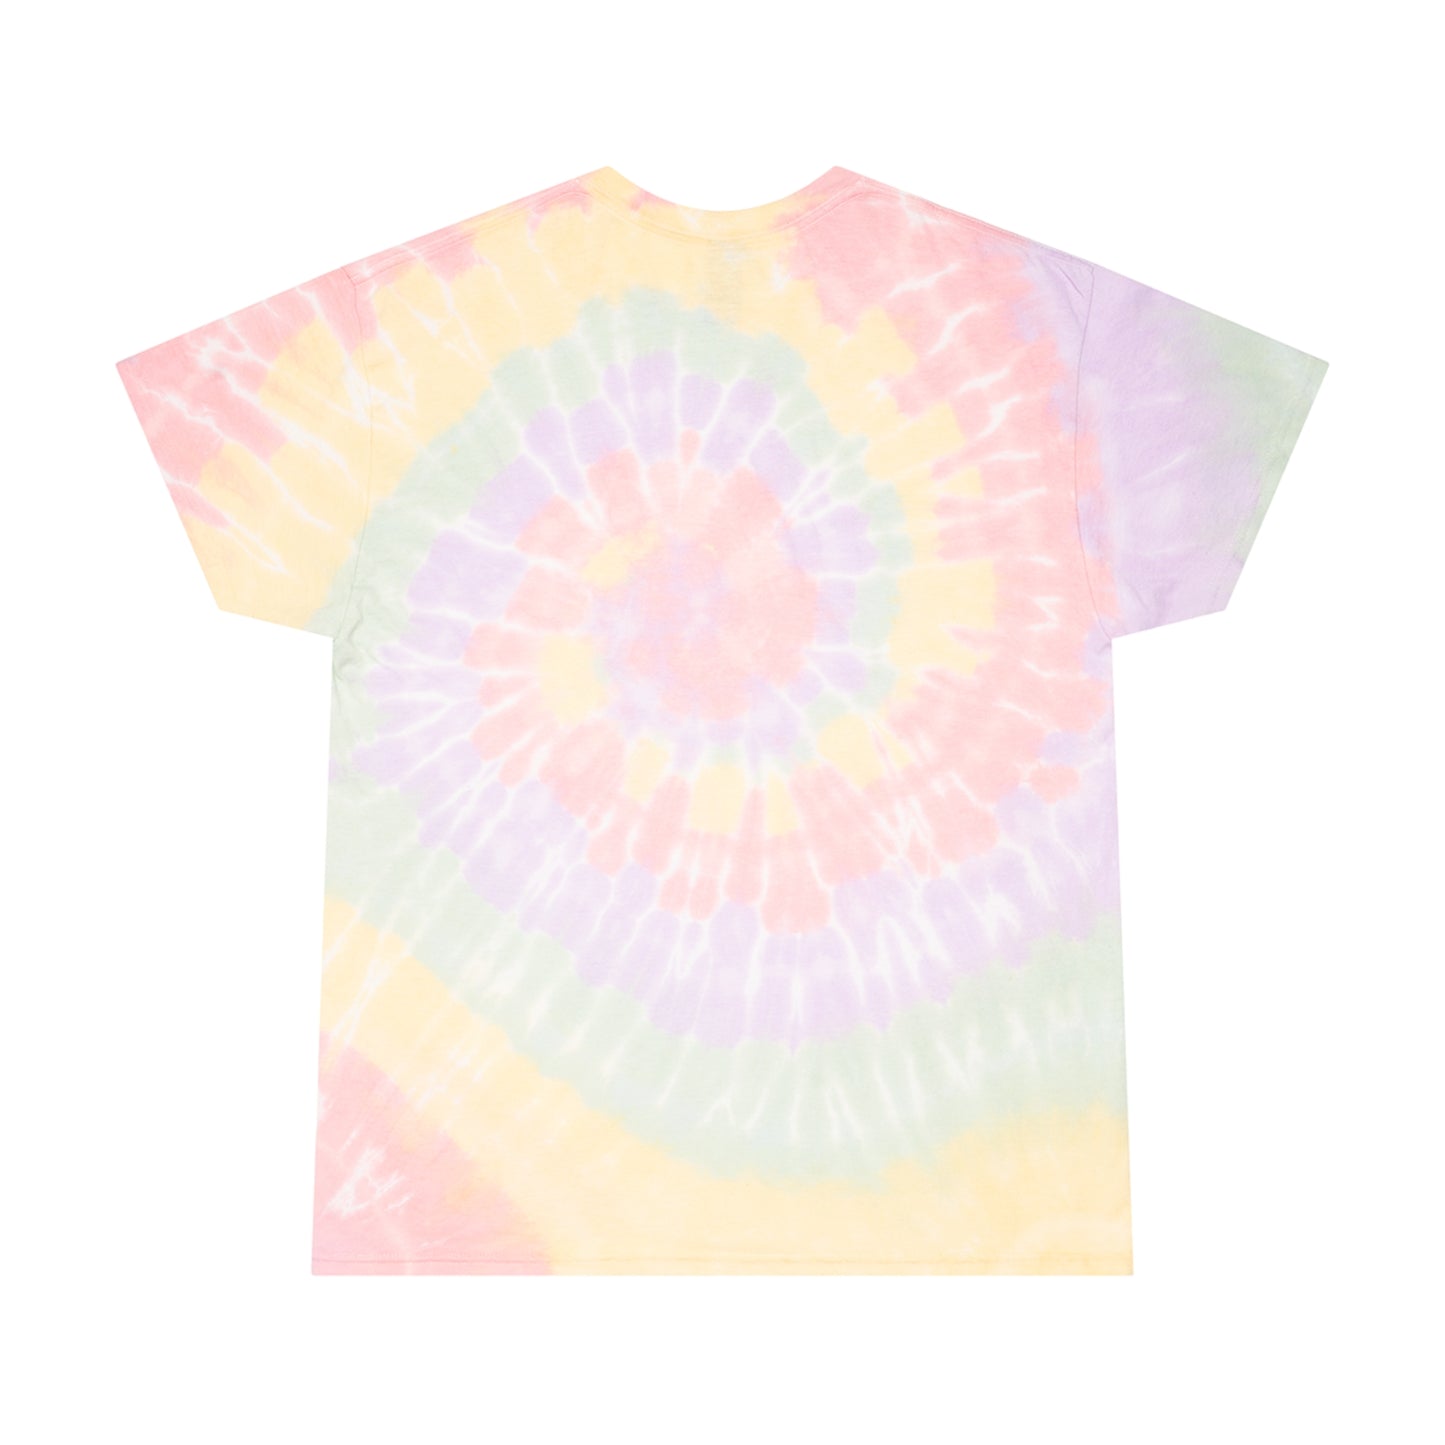 The Long Road To Justice Tie-Dye Tee, Spiral